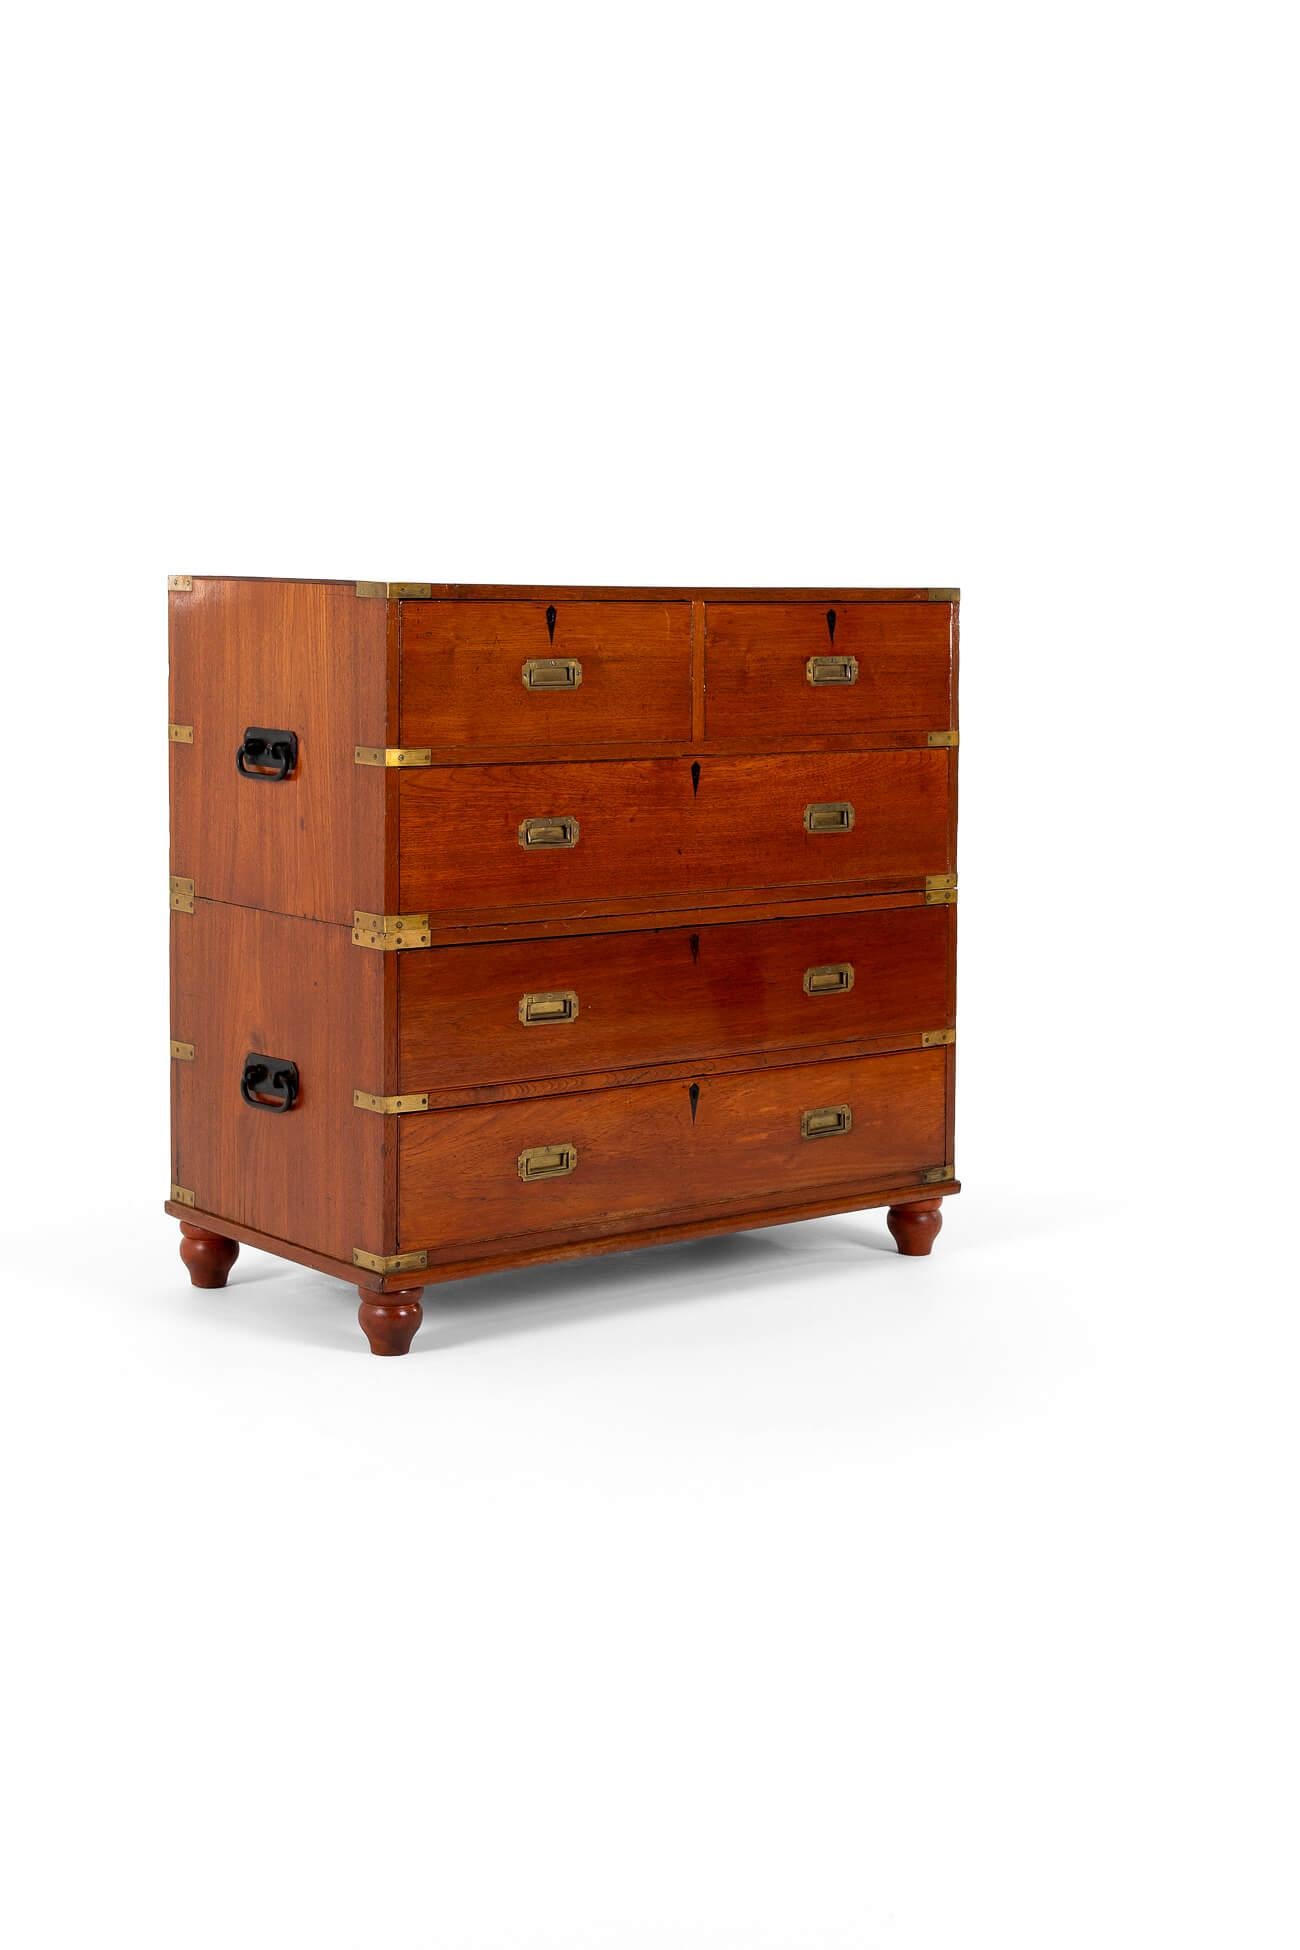 An English 19th-century campaign chest in two parts with removable feet in teak.

The chest has two short drawers, a deep second draw below, and two long drawers to the bottom half.

Each of the two sections has a pair of heavy iron handles on